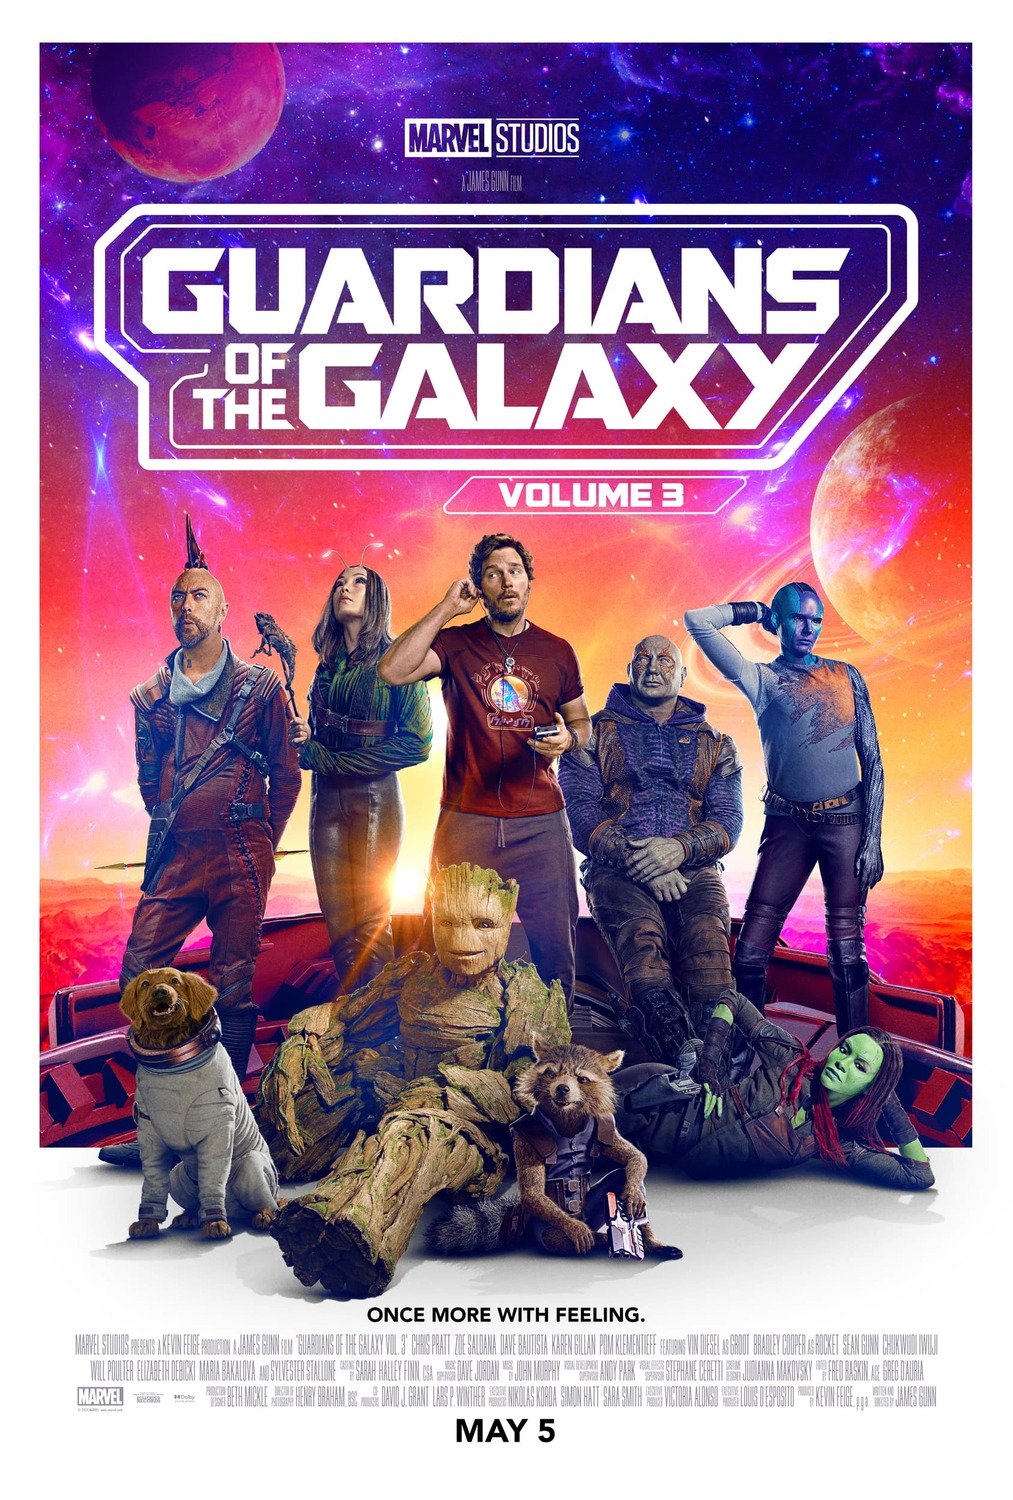 Guardians of the Galaxy Vol. 3 (PG)